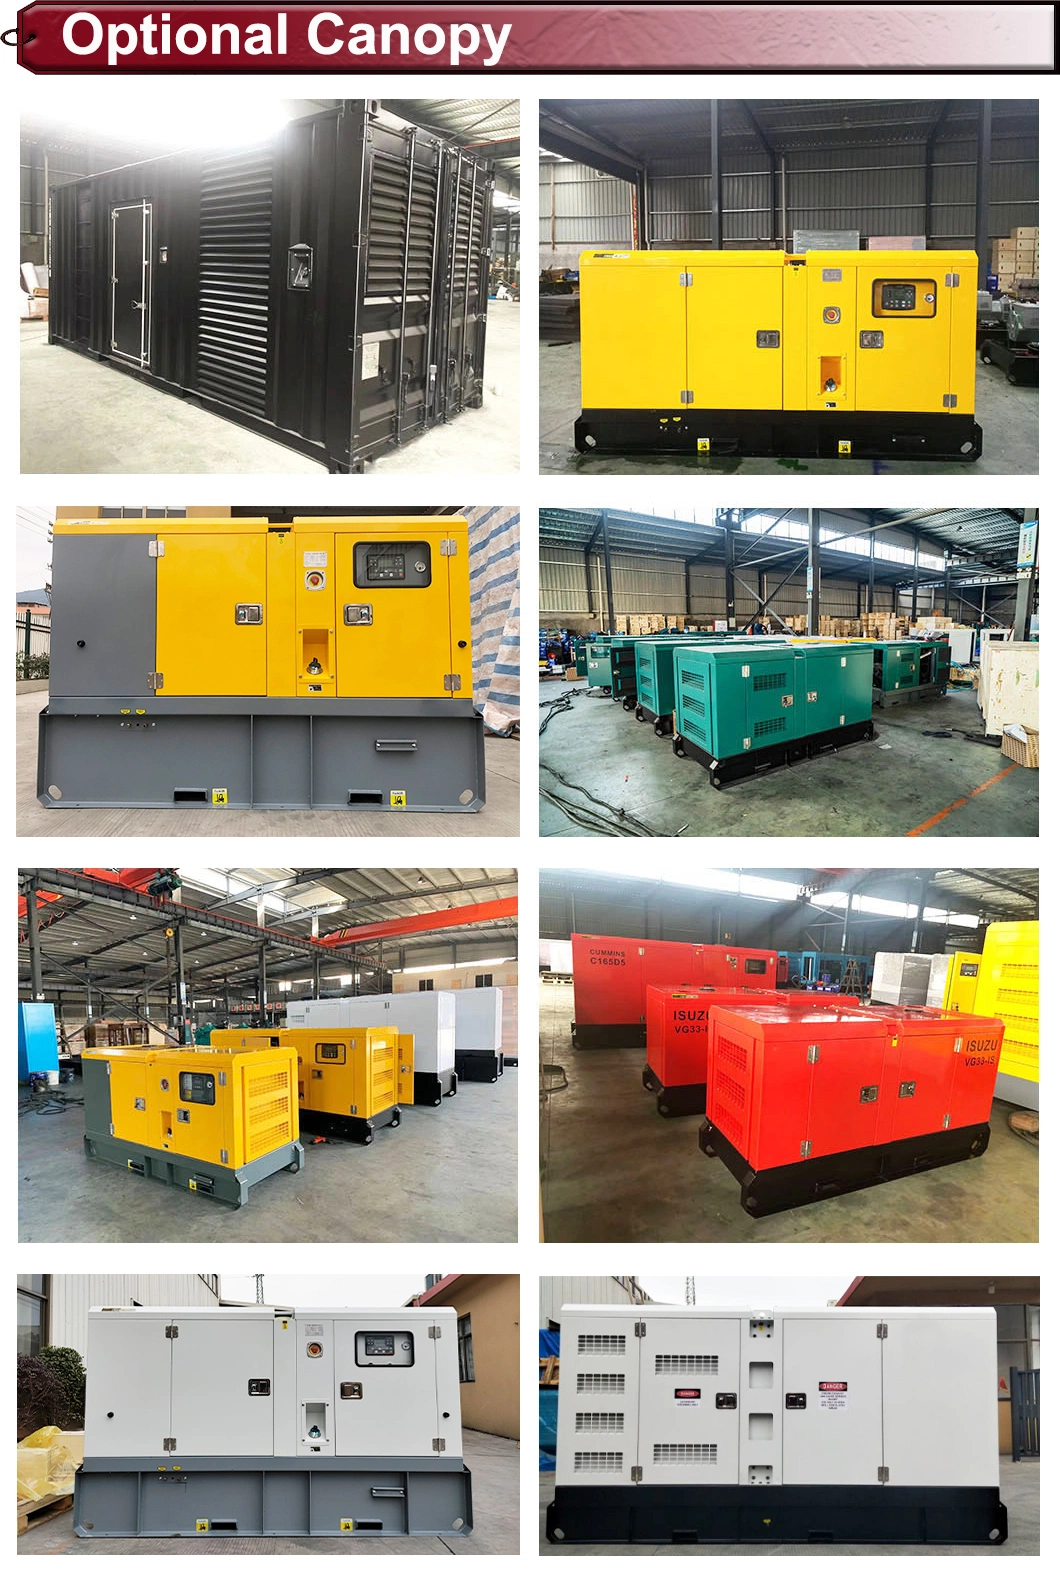 20 Kw 25 kVA Power Silent Diesel Motor Generator Water Cool Commercial Synchronous Deisel Generaters 15 - 20 Kw Price List